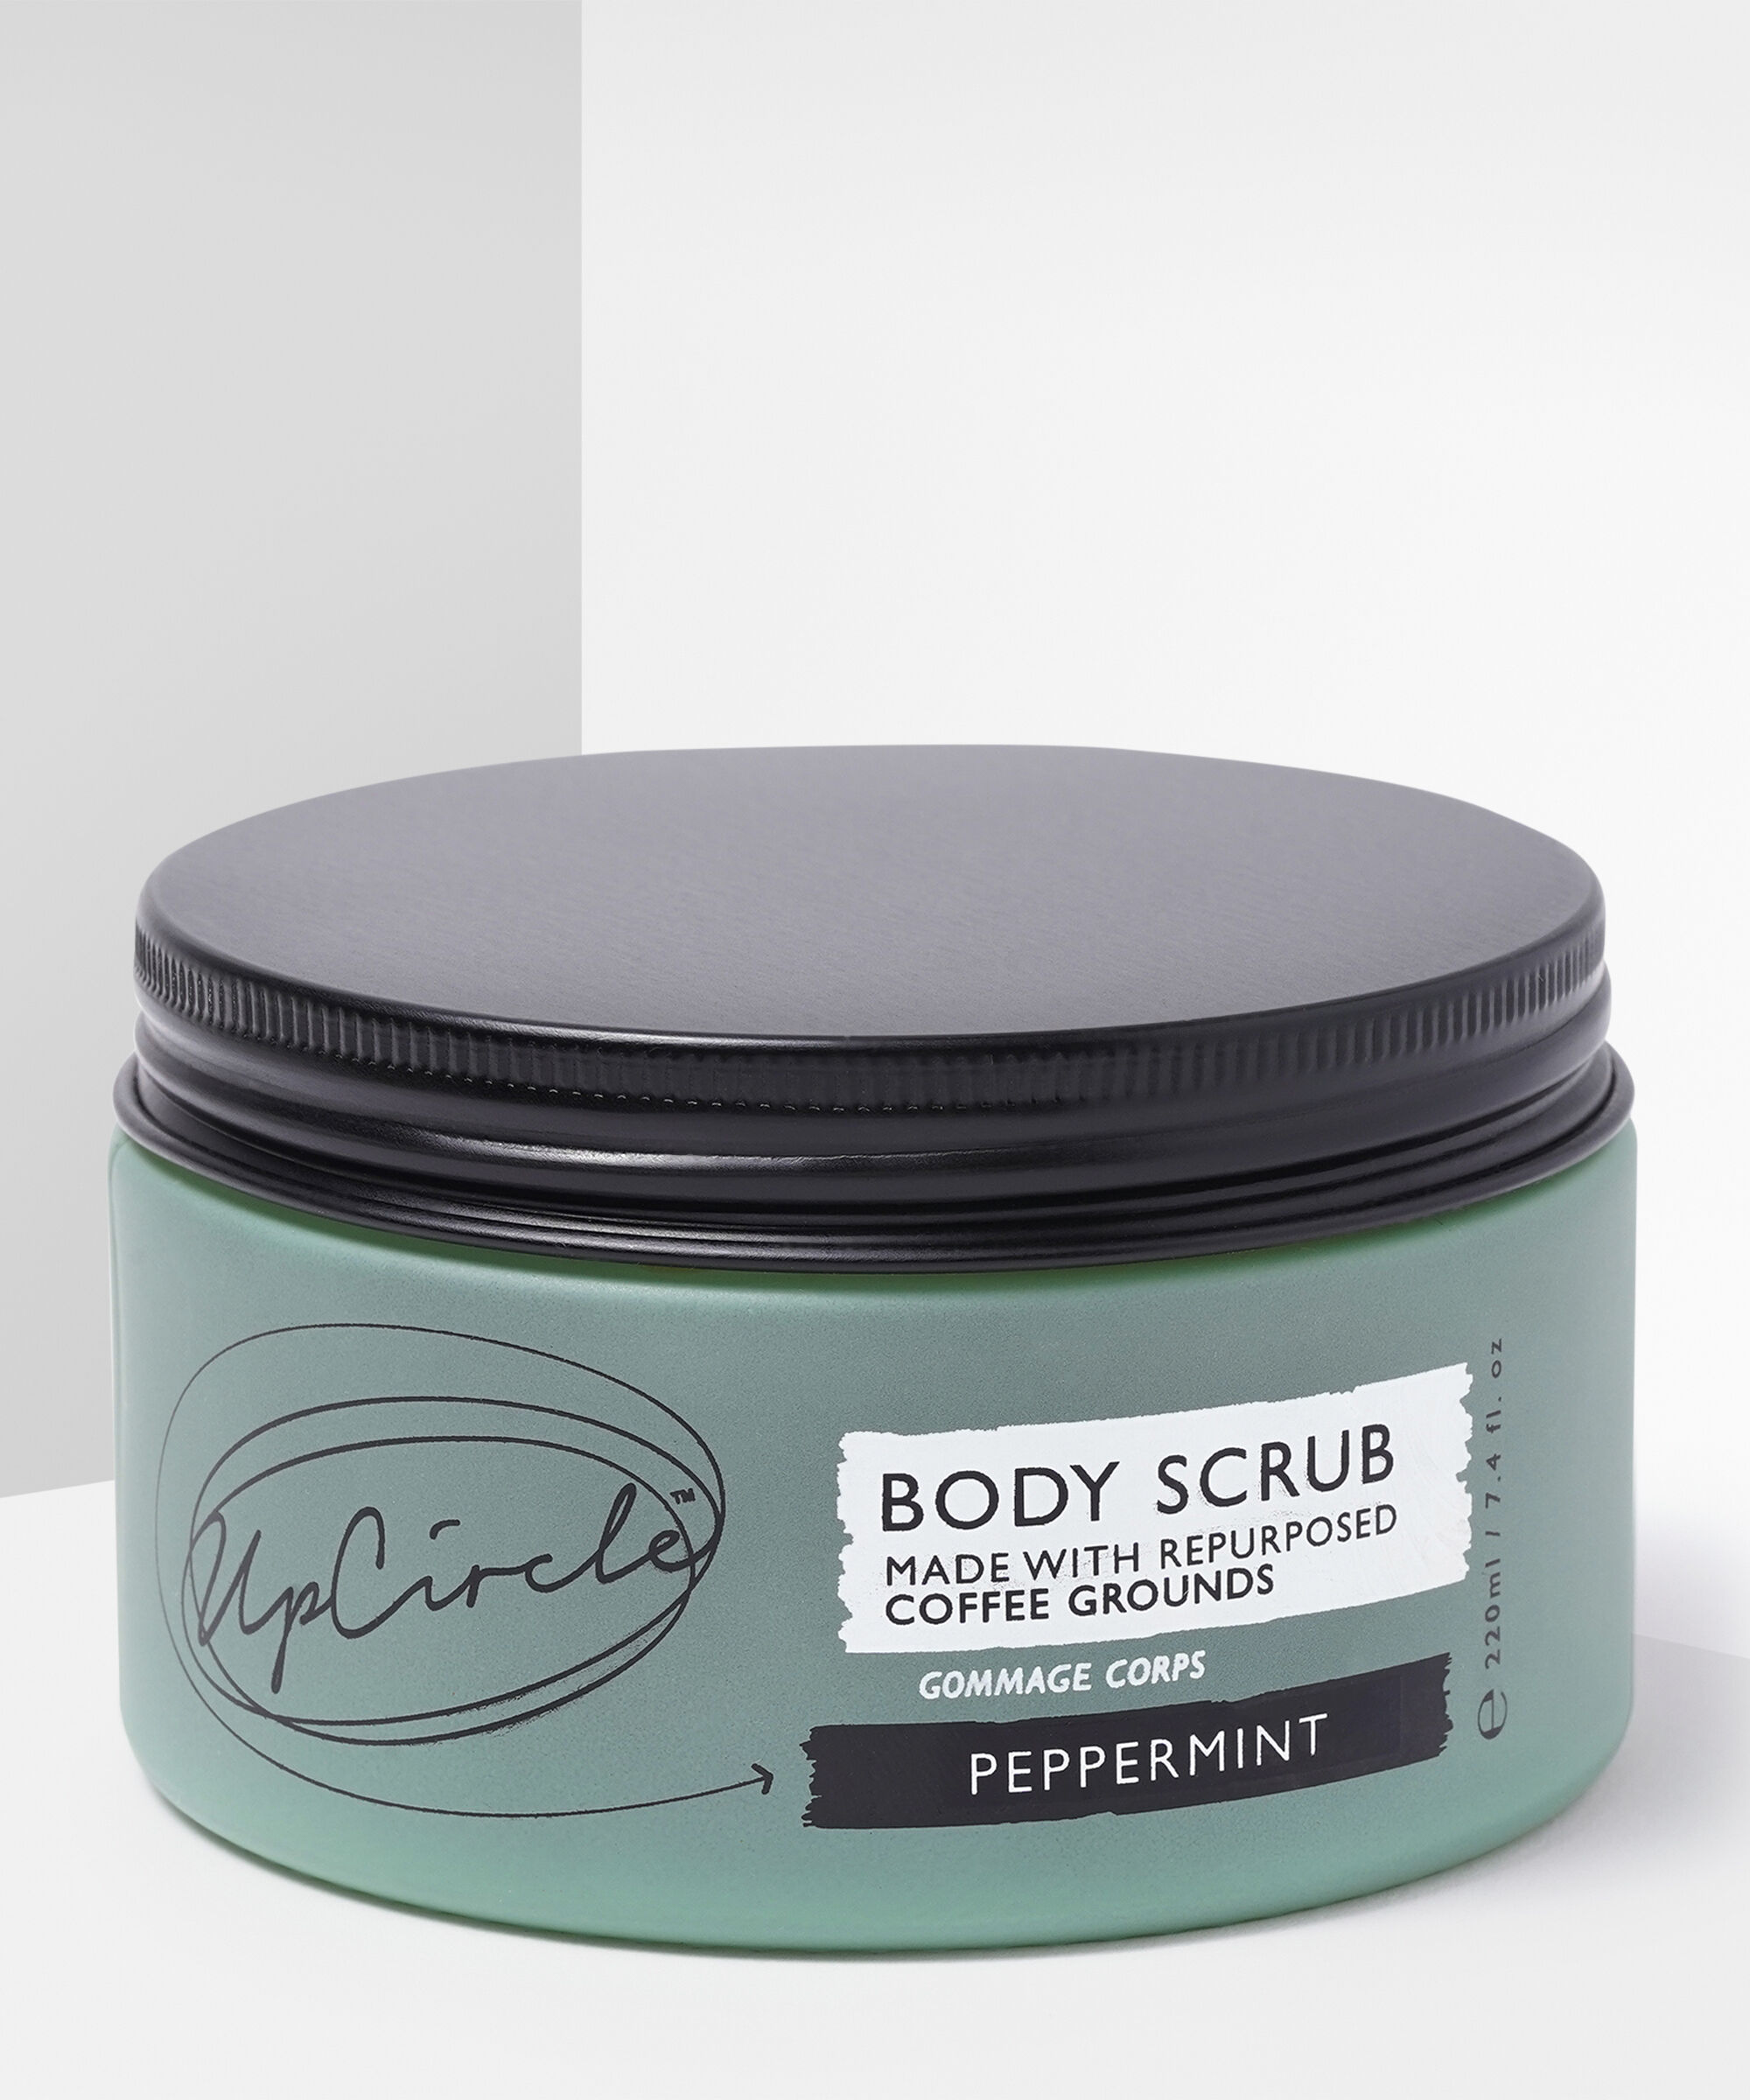 UpCircle Beauty - Coffee Body Scrub with Peppermint